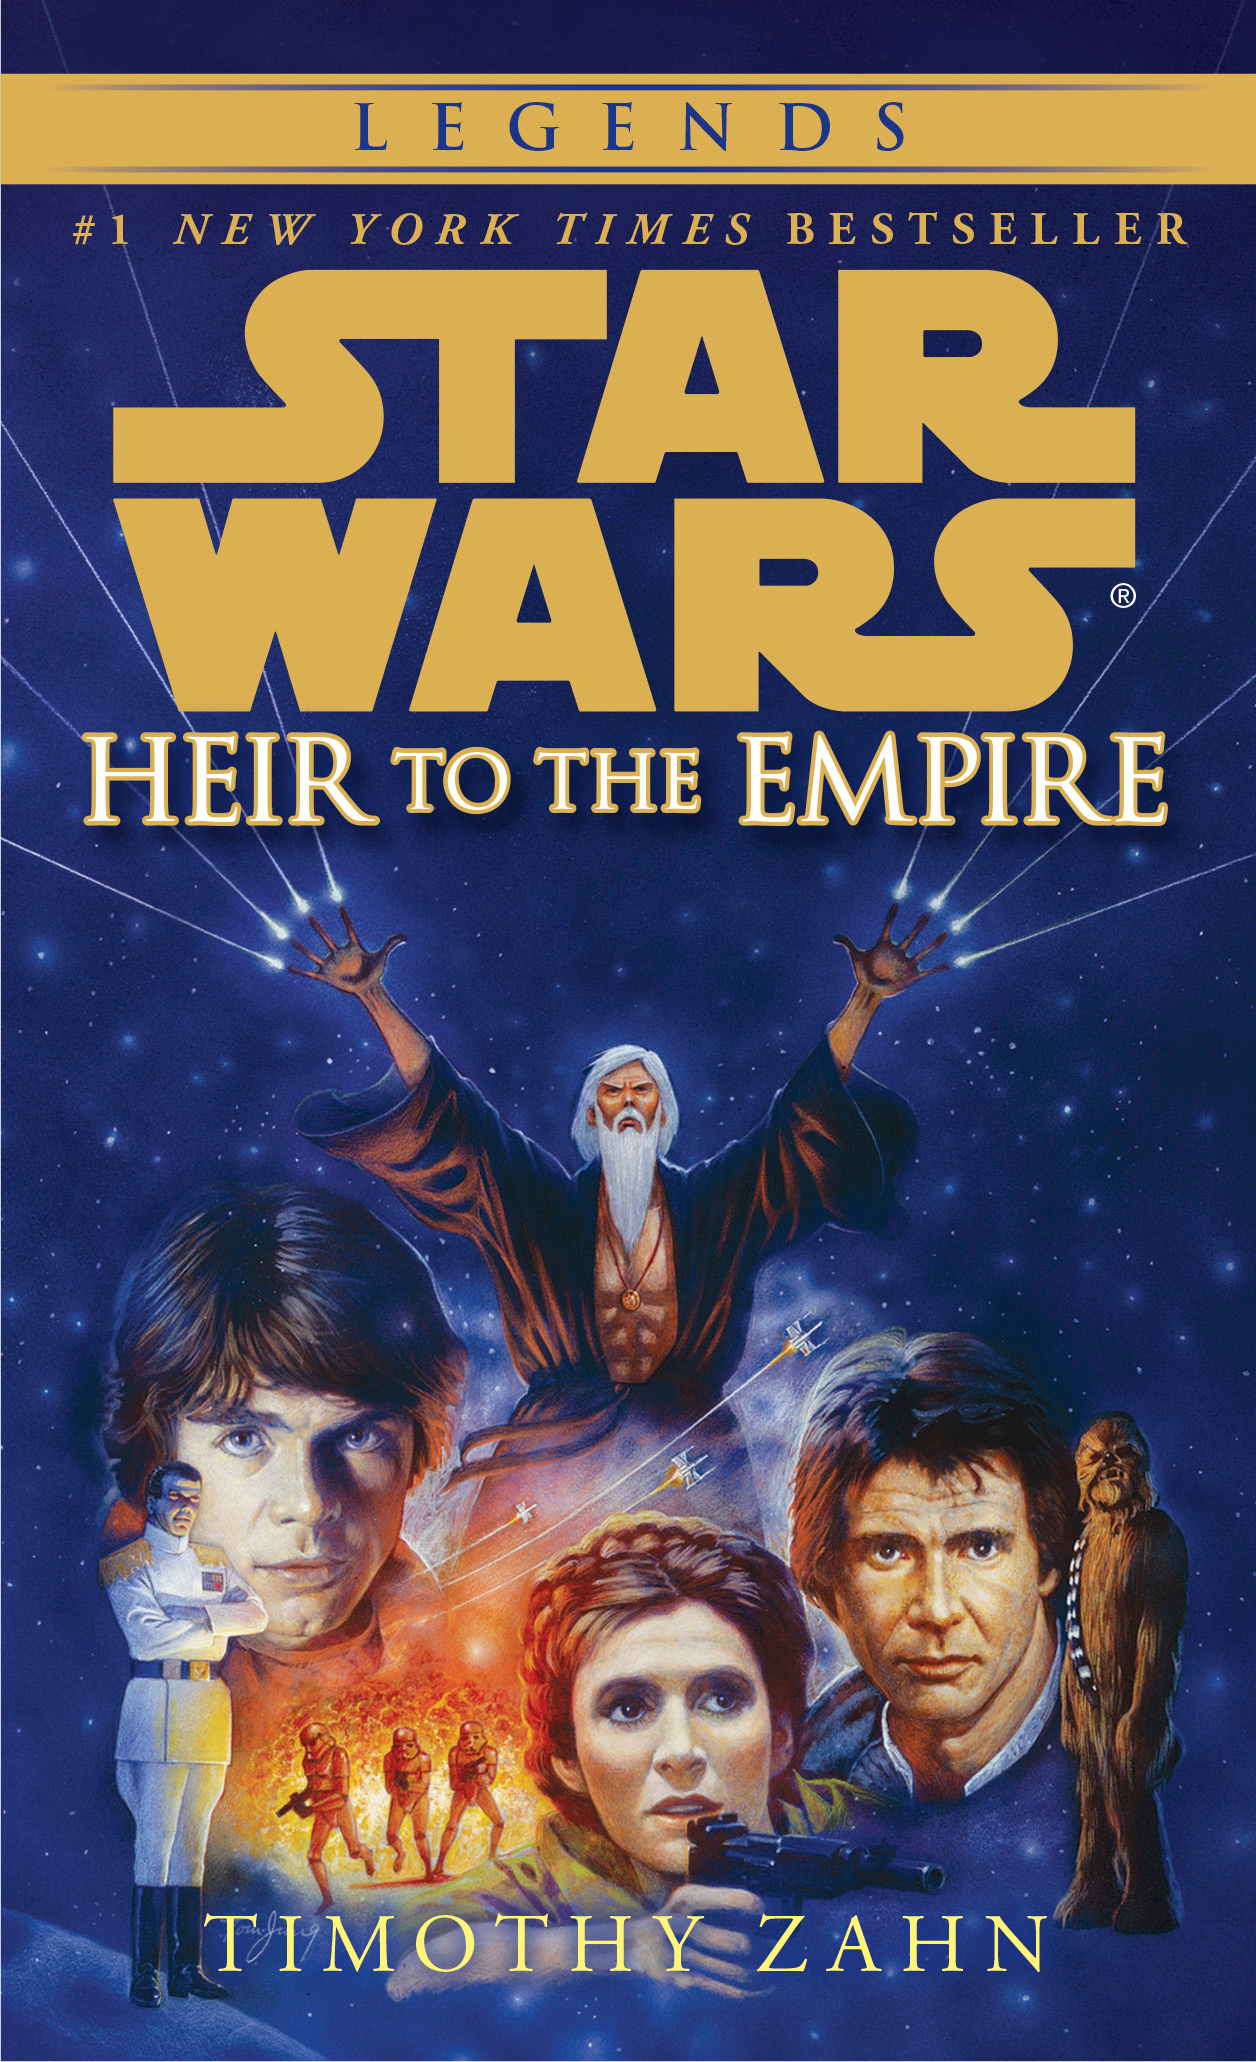 What is the role of Star Wars books in expanding the universe?